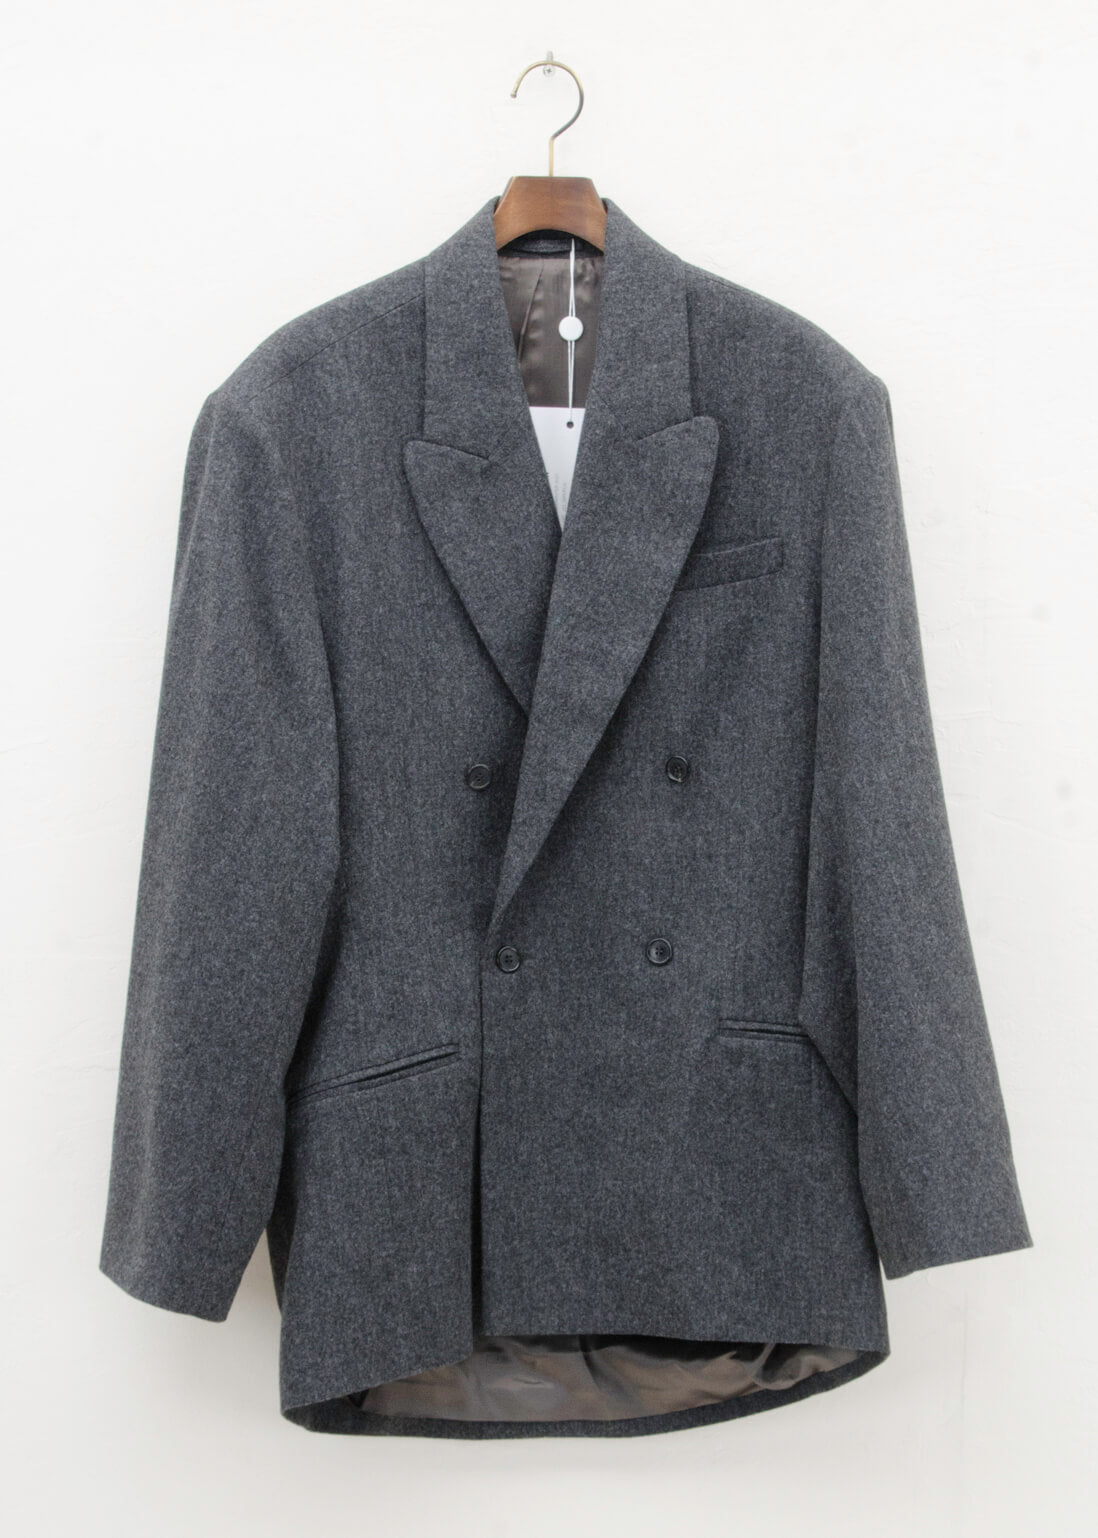 HED MAYNER DROPPED BACK DOUBLE BREASTED JACKET / GRAY FLANNEL